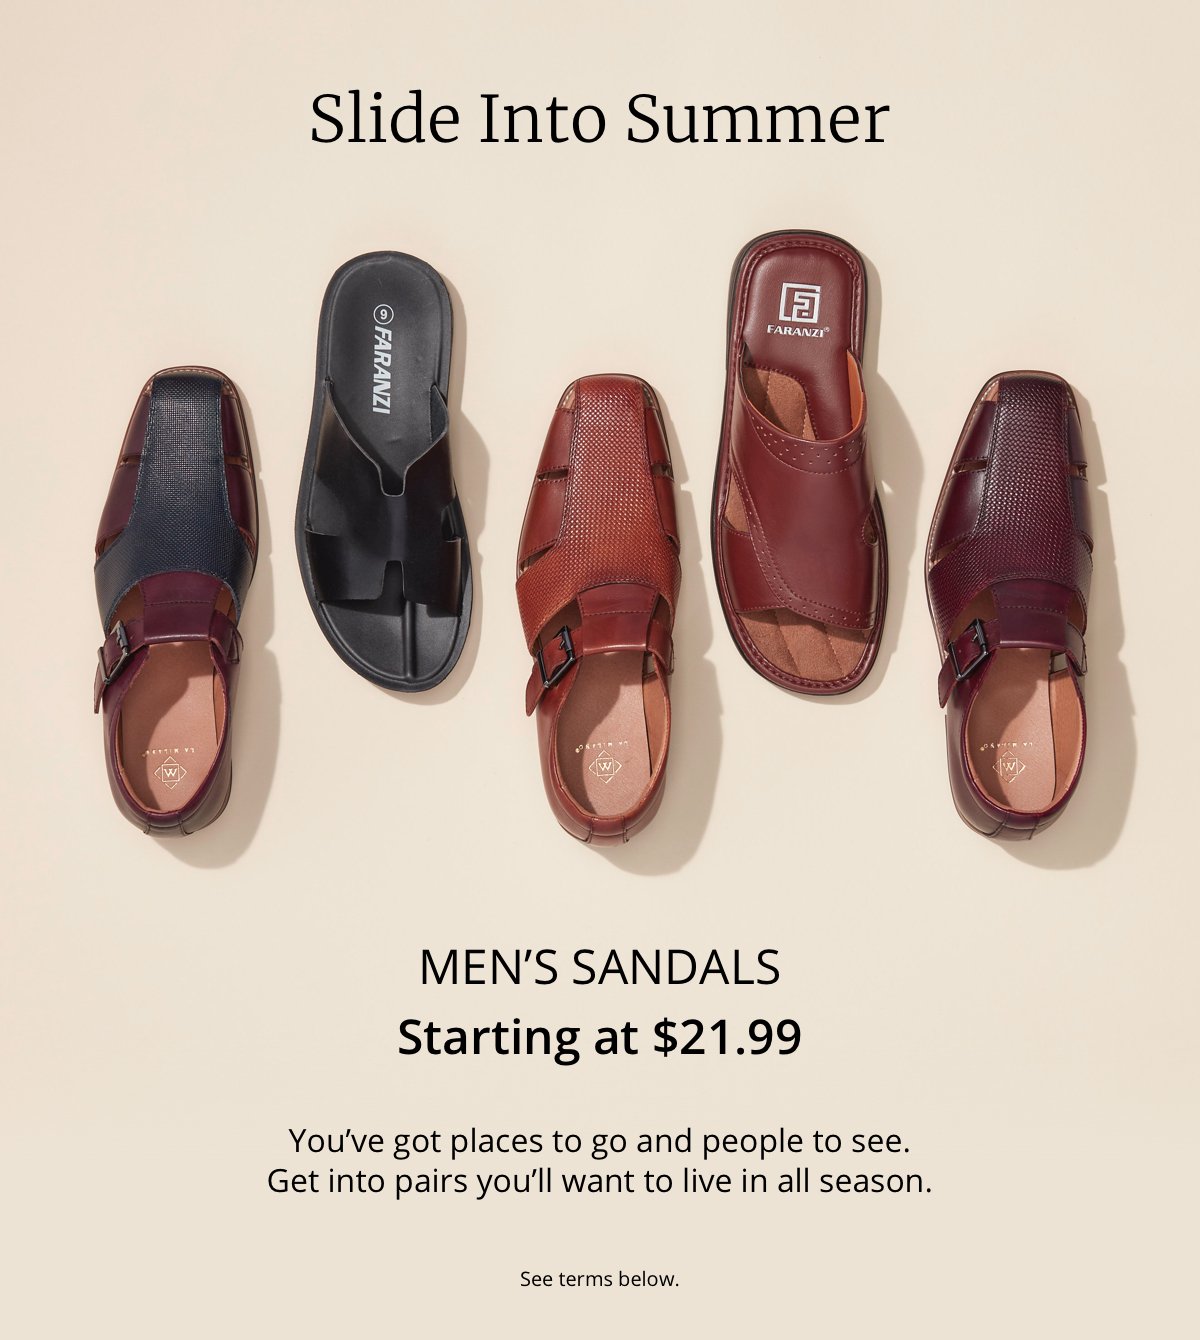 Slide Into Summer|Men’s Sandals|Starting at \\$21.99|You’ve got places to go and people to see.|Get into pairs you’ll want to live in all season.|See terms below.